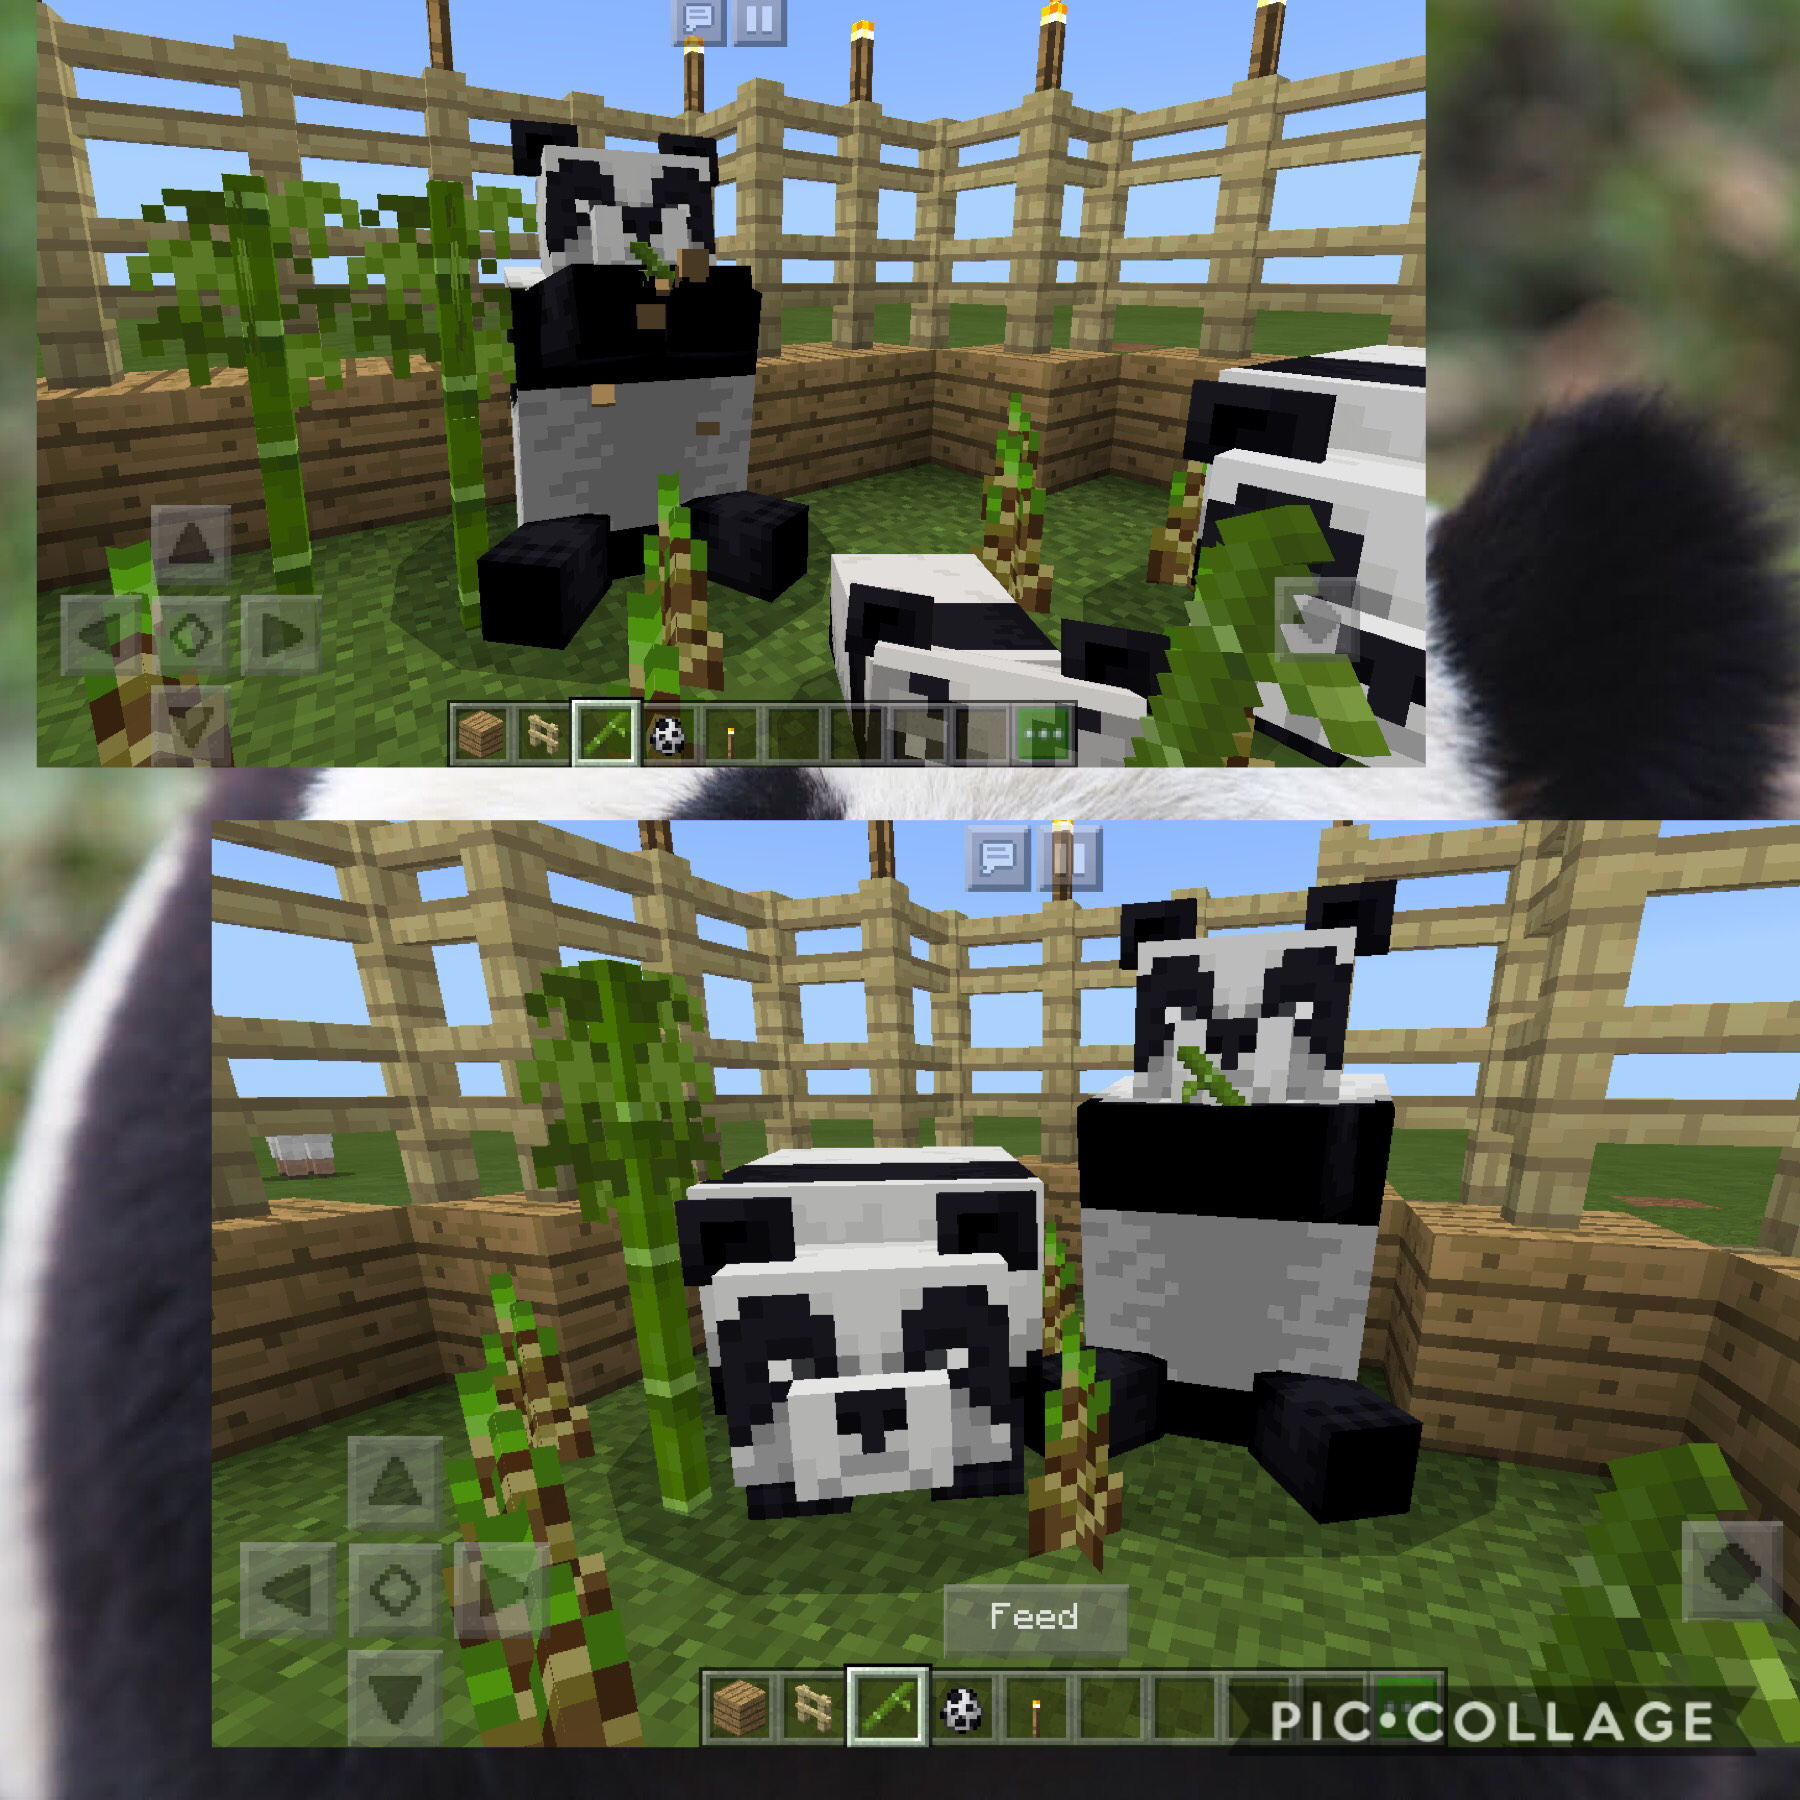 Awwww look what happens when I feed the pandas in Minecraft they just gotta new update with different cats and the ocelots have collars and yea go see for urself :)